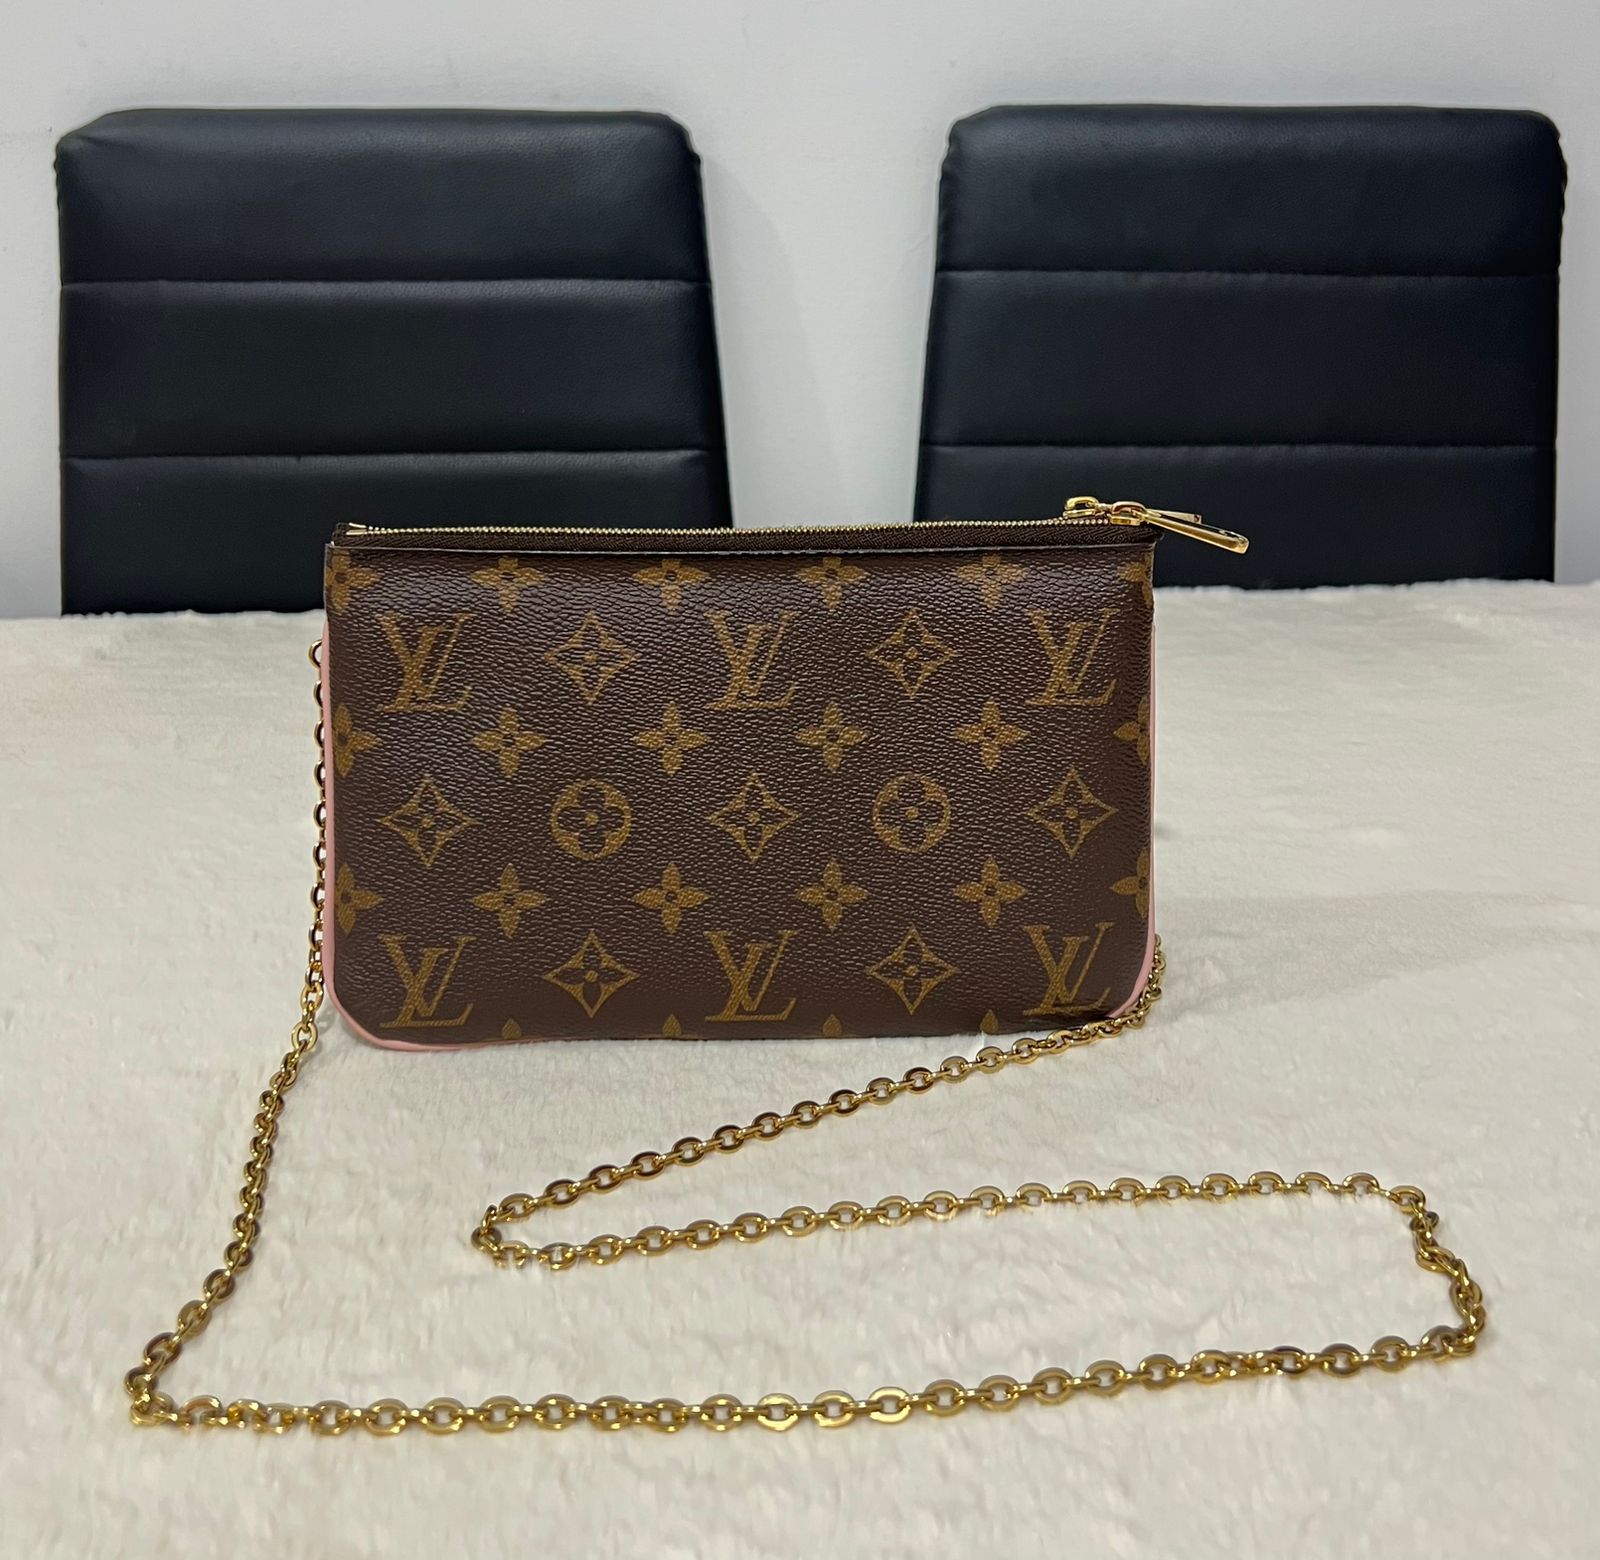 Bags, Authentic Lv Blooming Flowers Double Zip Pochette